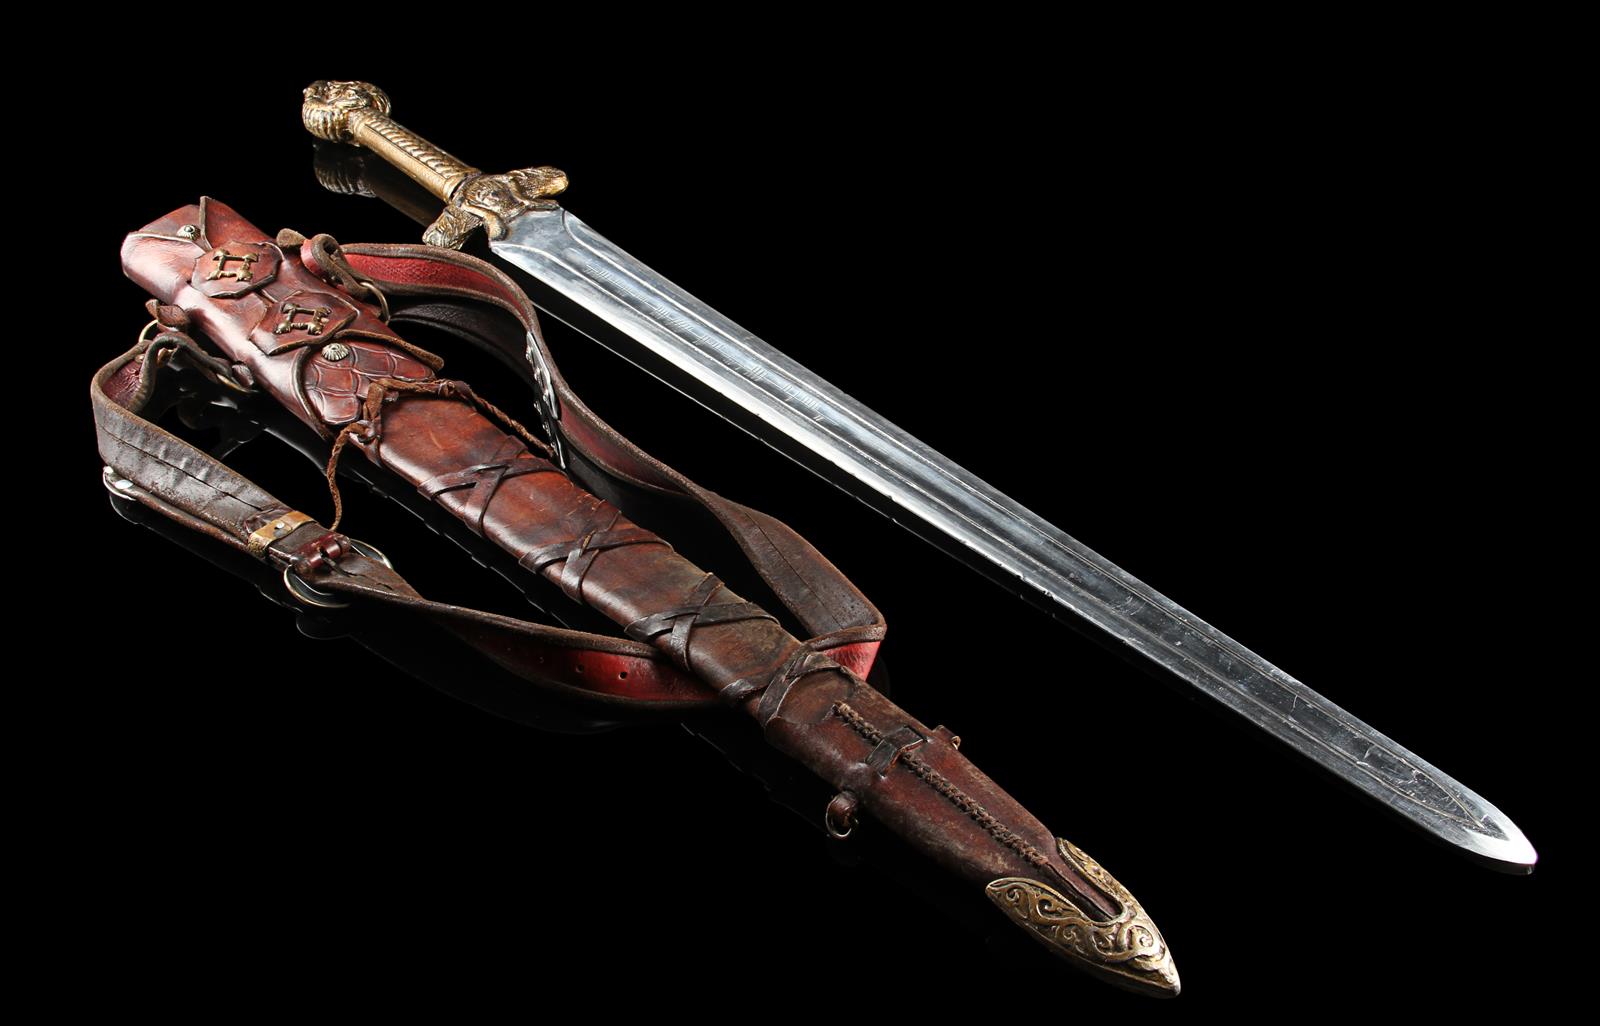 KING ARTHUR (2004) - Hero Excalibur Sword and Scabbard The fabled sword Excalibur from Antoine - Image 12 of 13